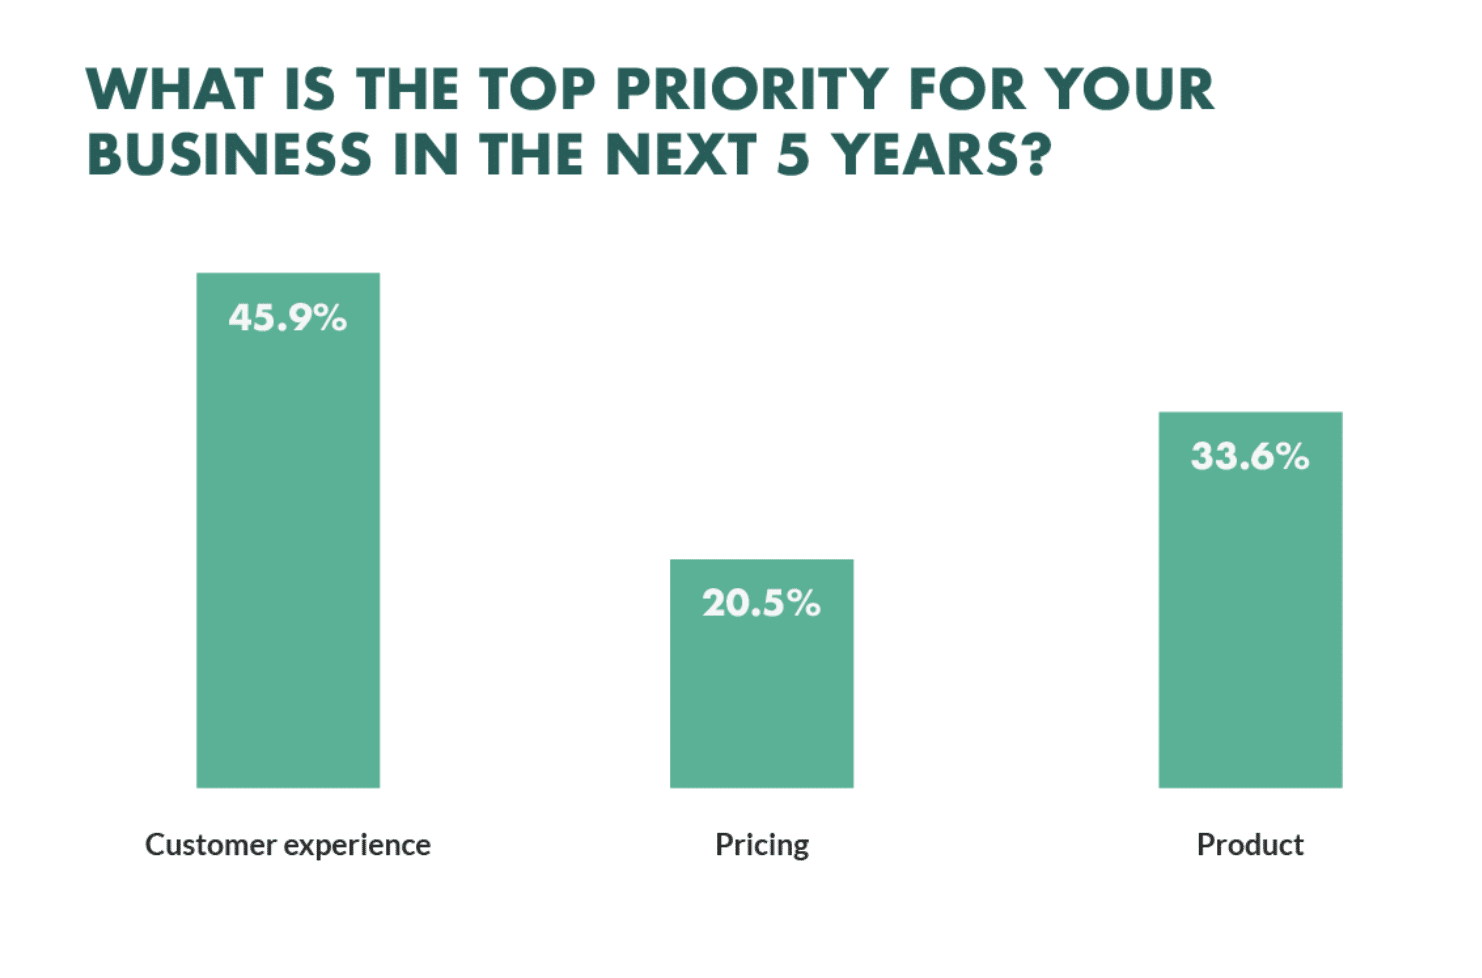 graph shows that customer experience is a top priority for businesses during the next 5 years